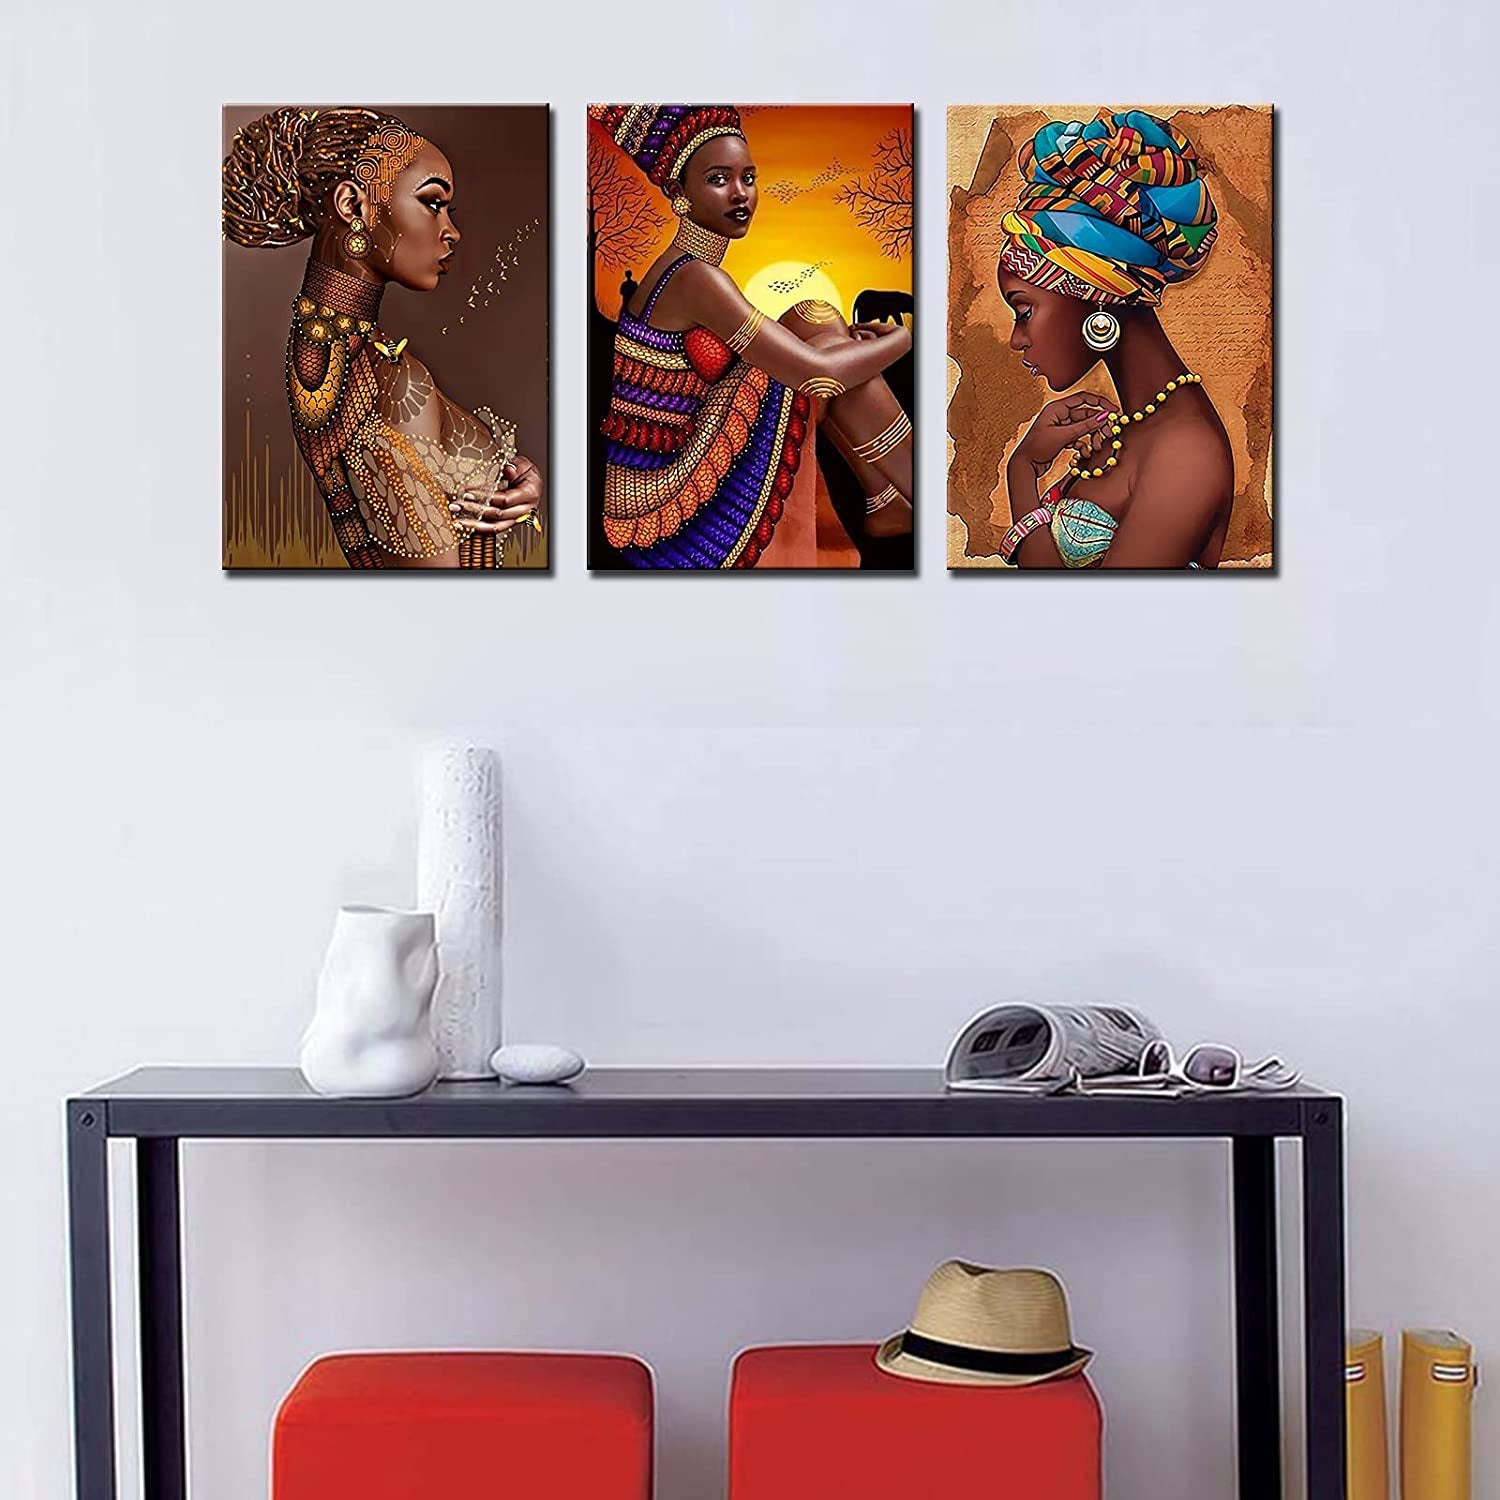 African Women Portrait Canvas Wall Art for Living Room Decor 3 Pieces Colorful Weird African Girl Oil Paintings Brown Kitchen Wall Decor Artwork Home Decor Room Wall Pictures Framed 42X20 Inch